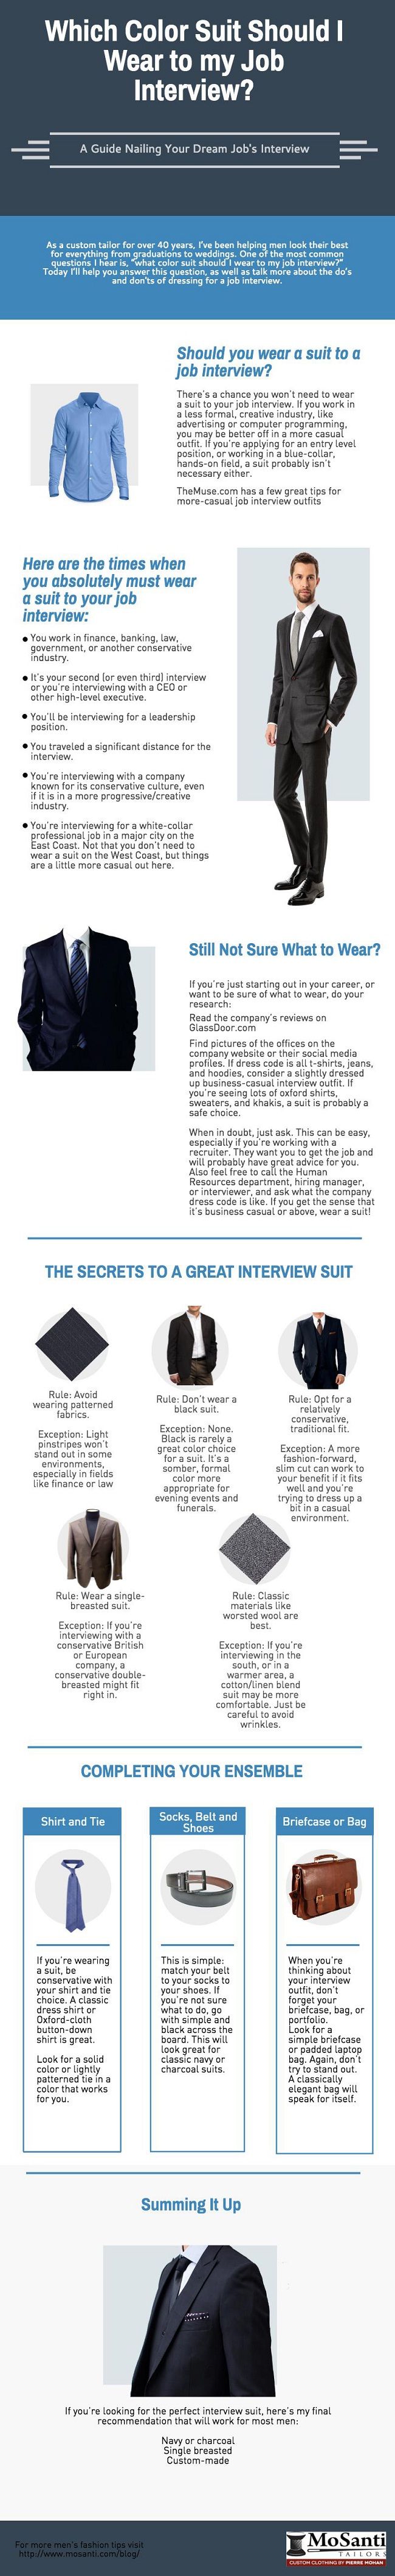 Fashion infographic : What to wear for First impression in an interview ...